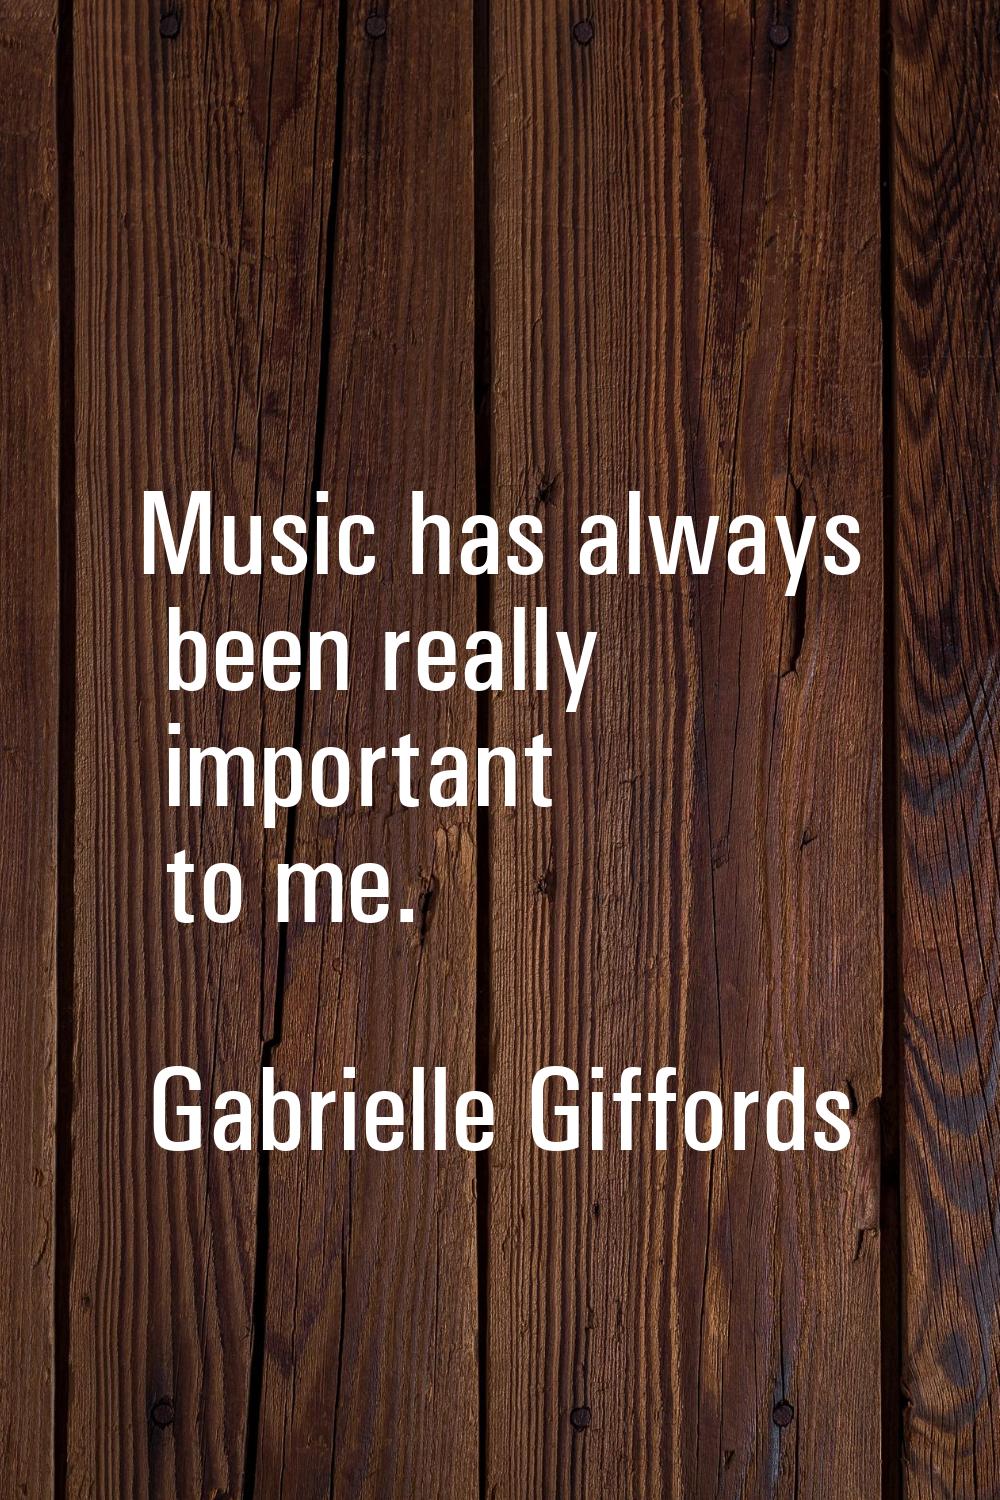 Music has always been really important to me.